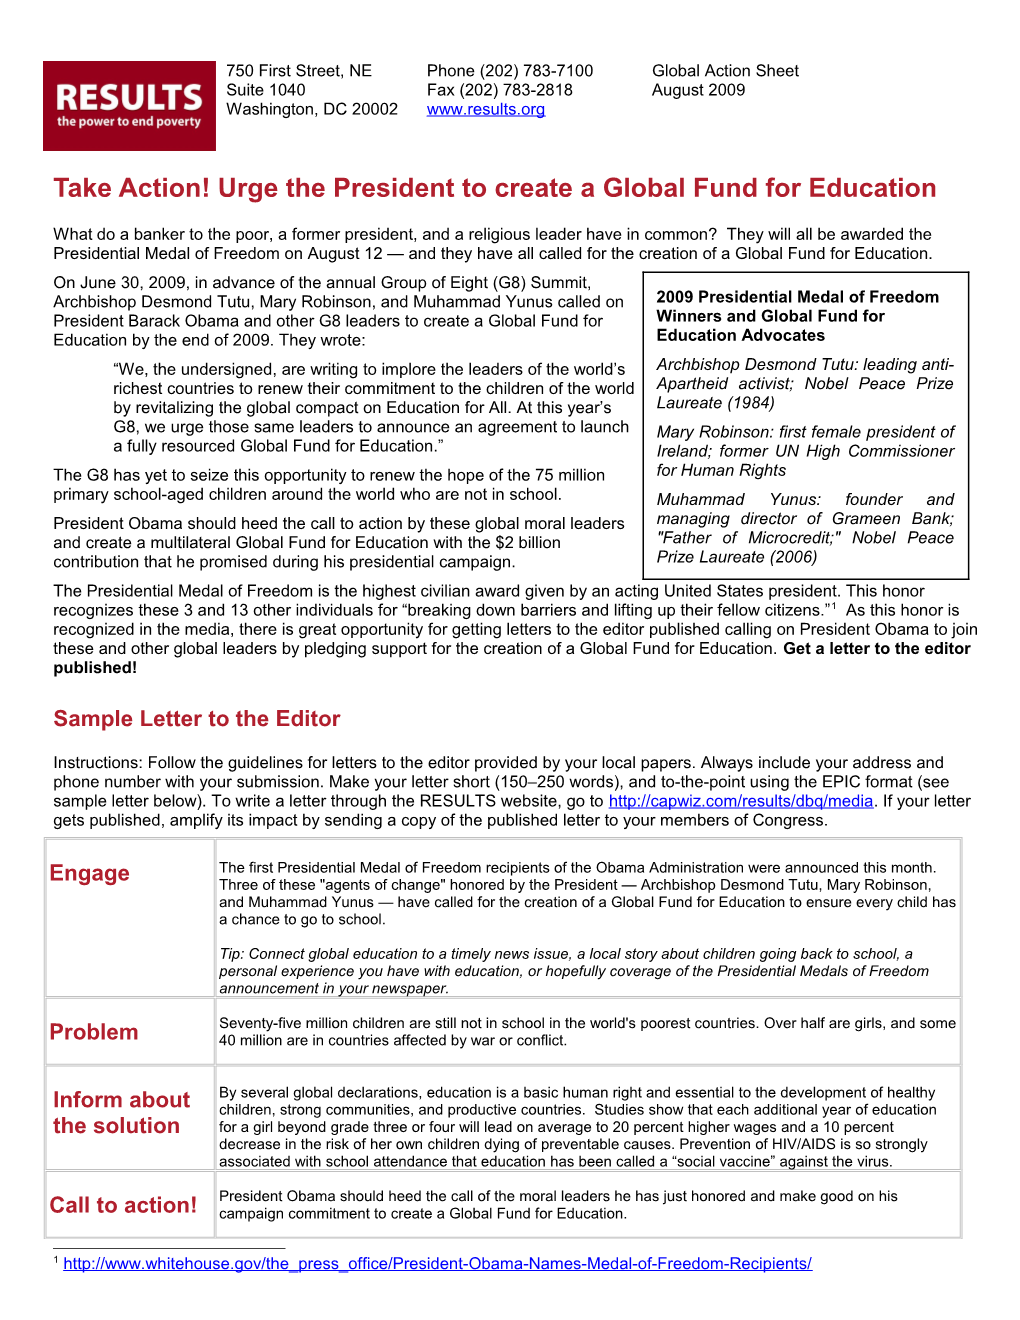 Take Action! Urge the President to Create a Global Fund for Education